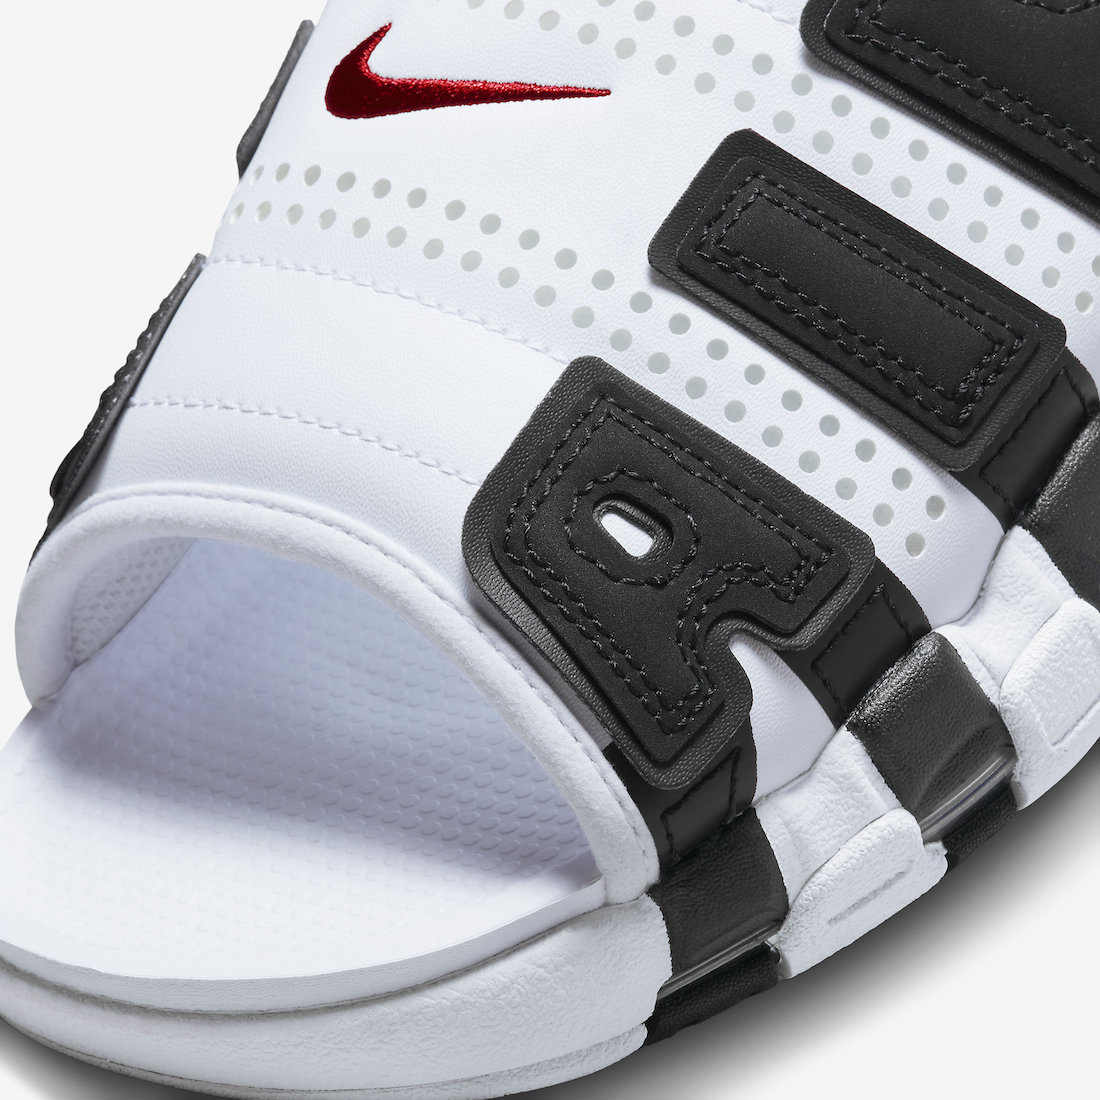 The Nike Air More Uptempo Slide Arrives in a Classic Colorway